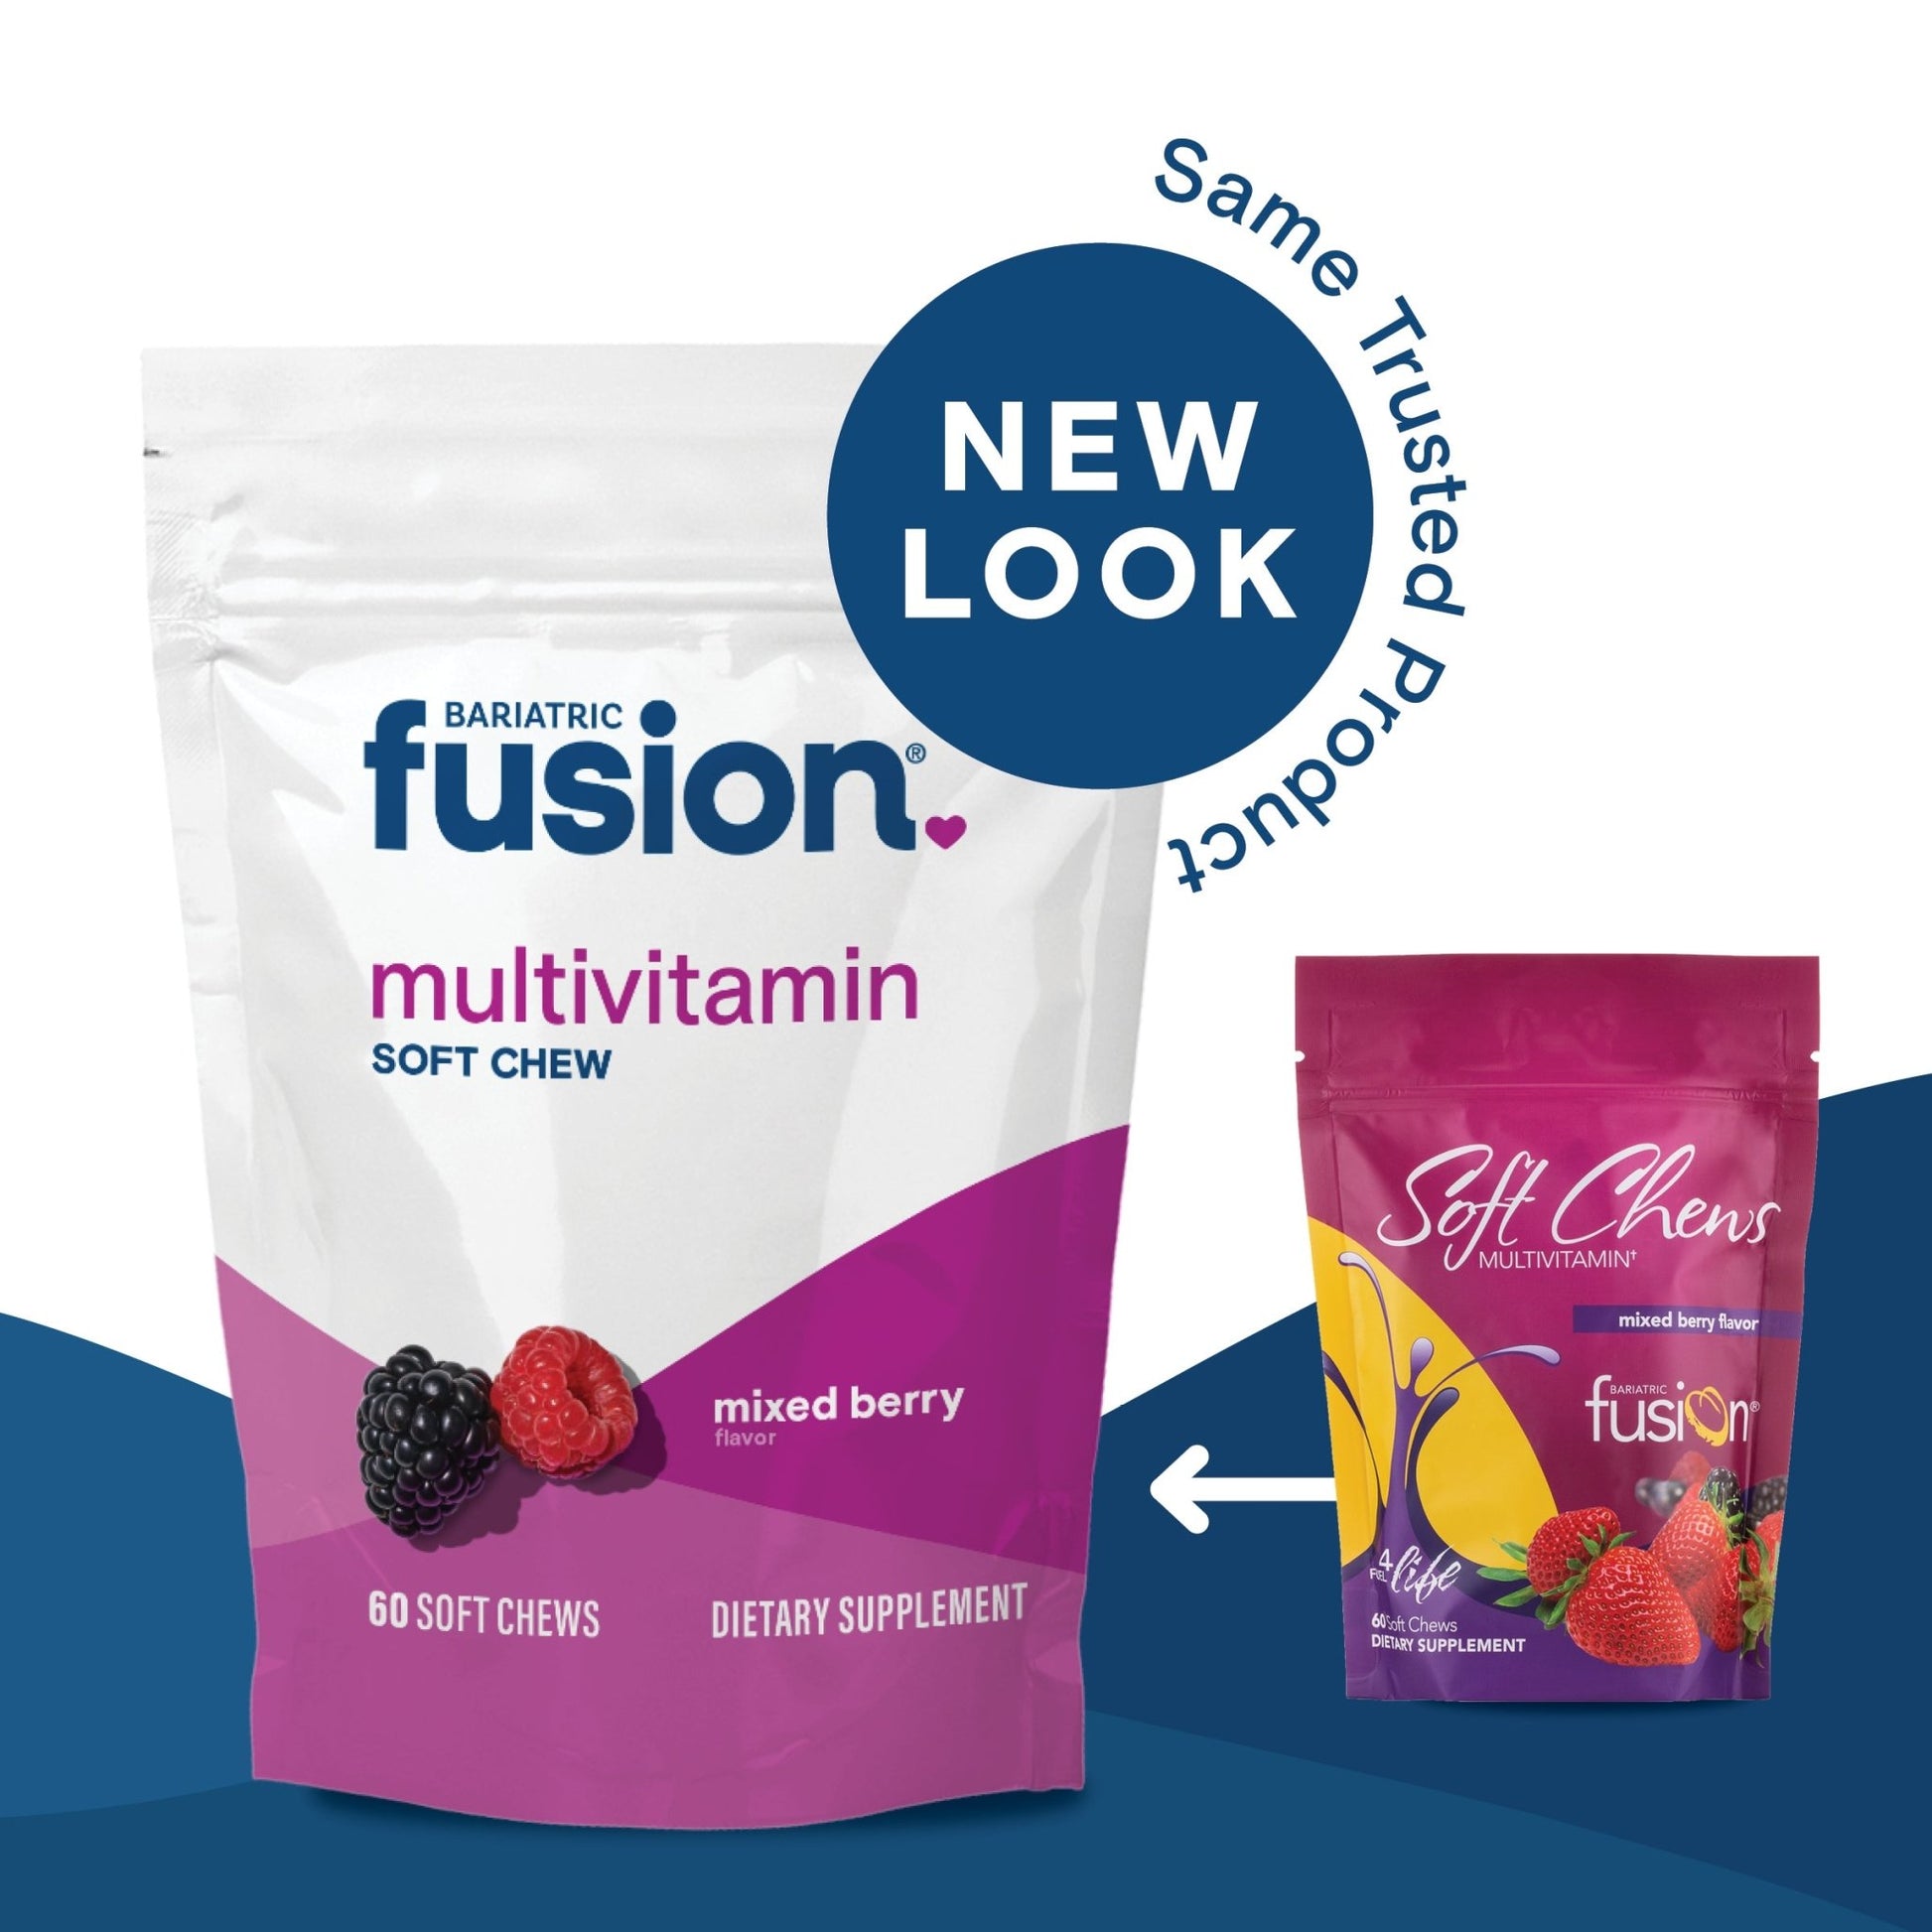 Bariatric Fusion Mixed Berry Bariatric Multivitamin Soft Chew new look, same trusted product.